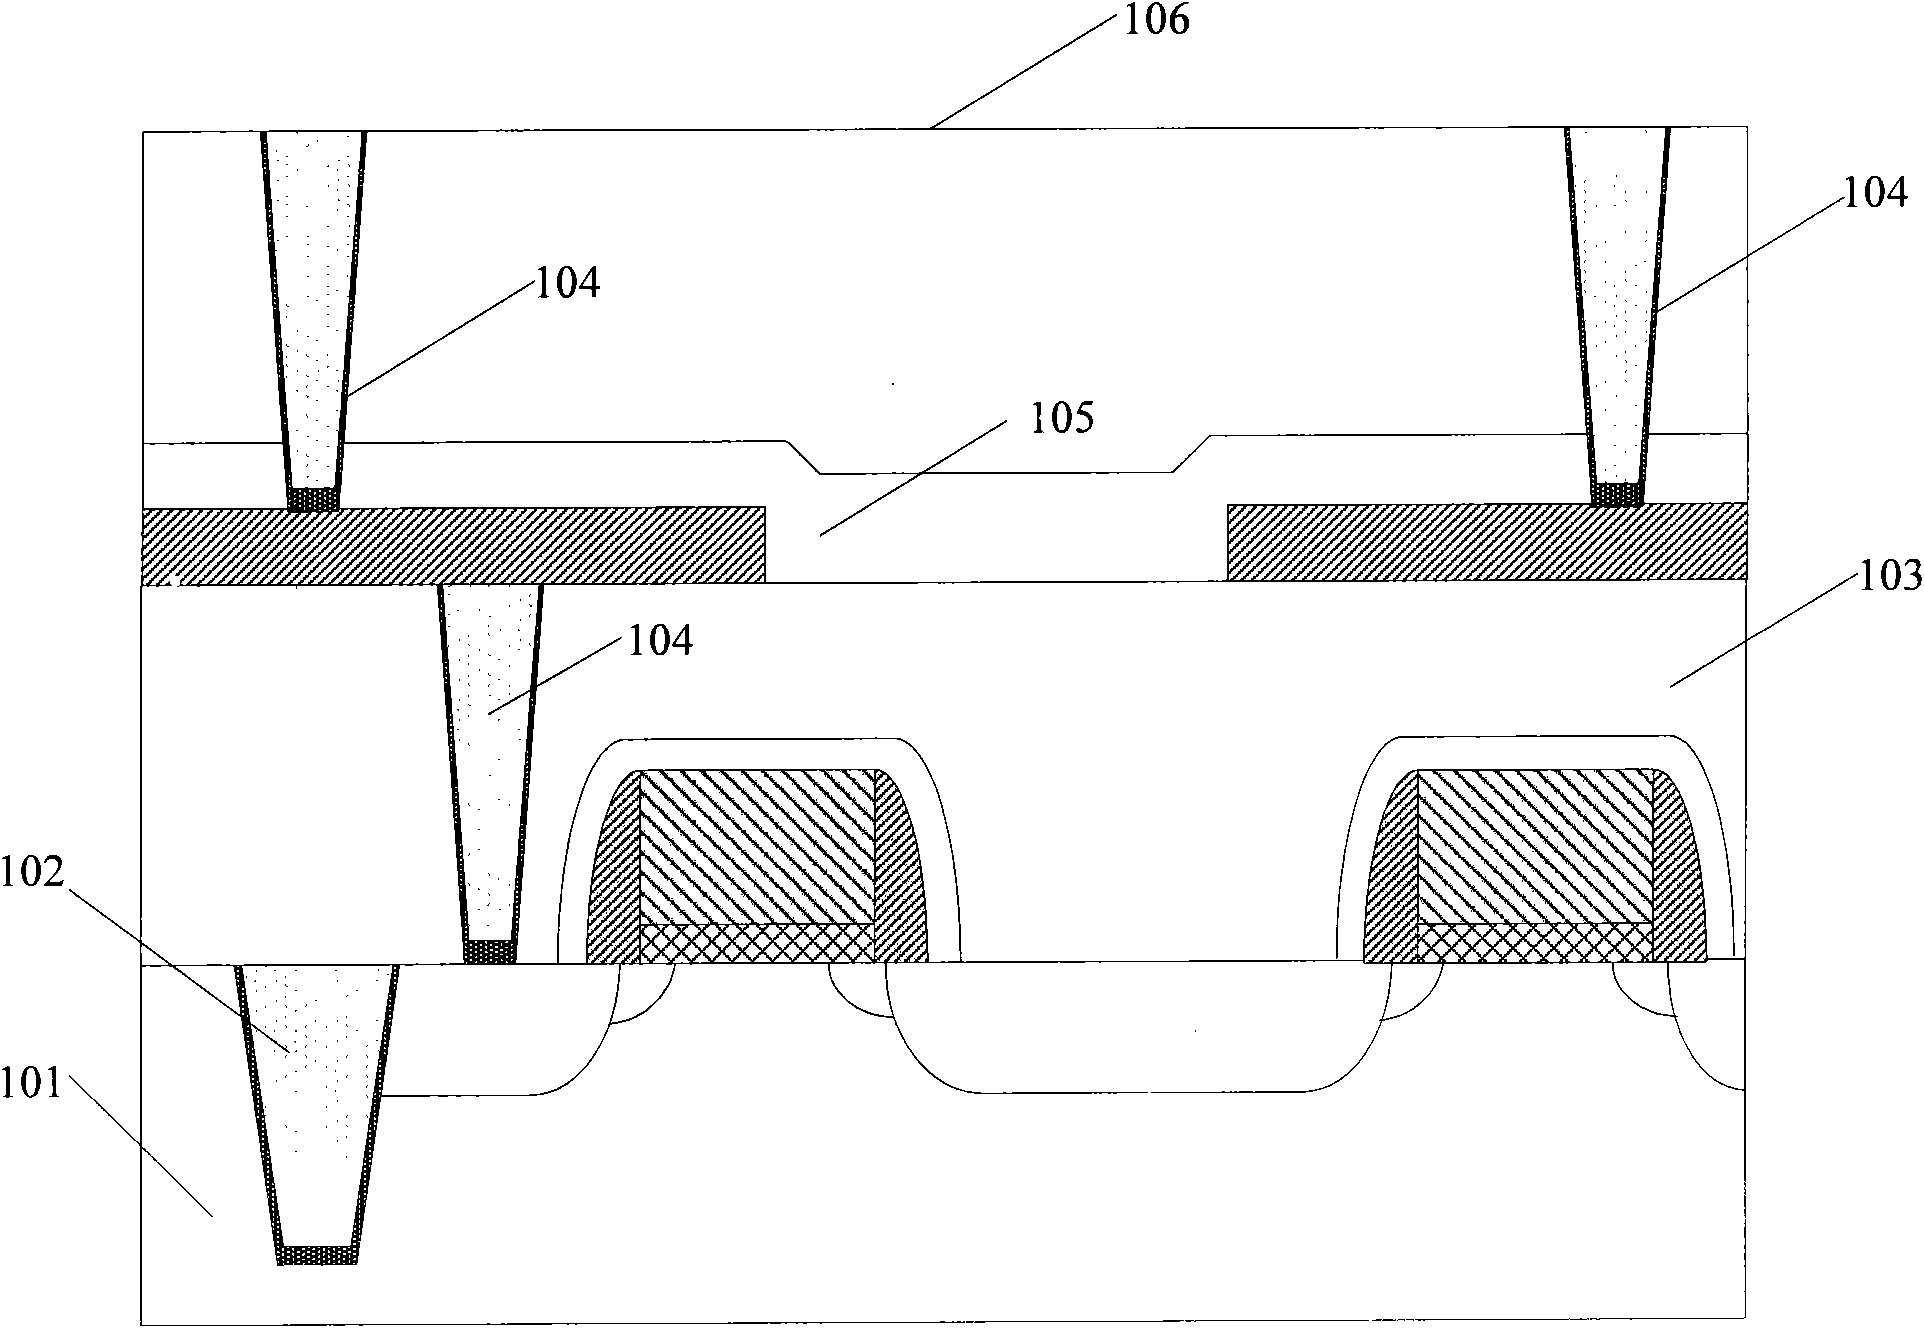 Chemical vapor deposition method assisted by non-plasma